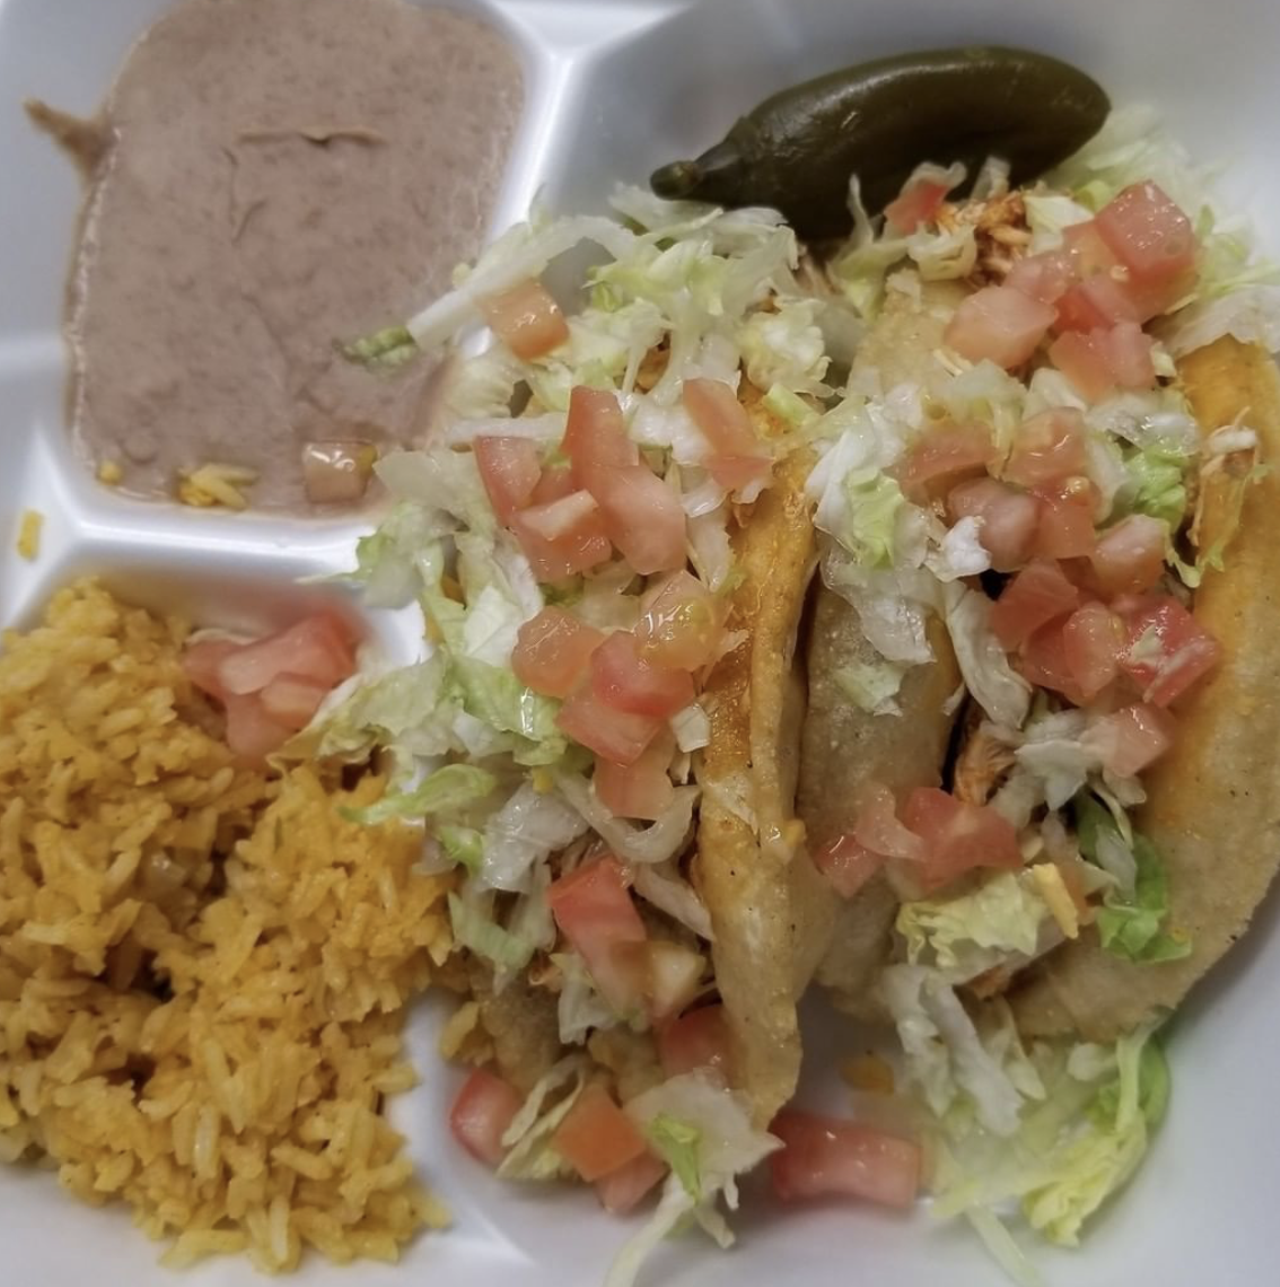 Ray’s Drive Inn
822 SW 19th St., (210) 432-7171, raysdriveinn.net
The home of the puffy taco is a San Anto staple. Visit Ray’s to load up on the puffys — available in orders of one, two, three or four — or the Special Chicken Puffy Tacos with beans and rice for just $7.50.
Photo via Instagram / raysdriveinn